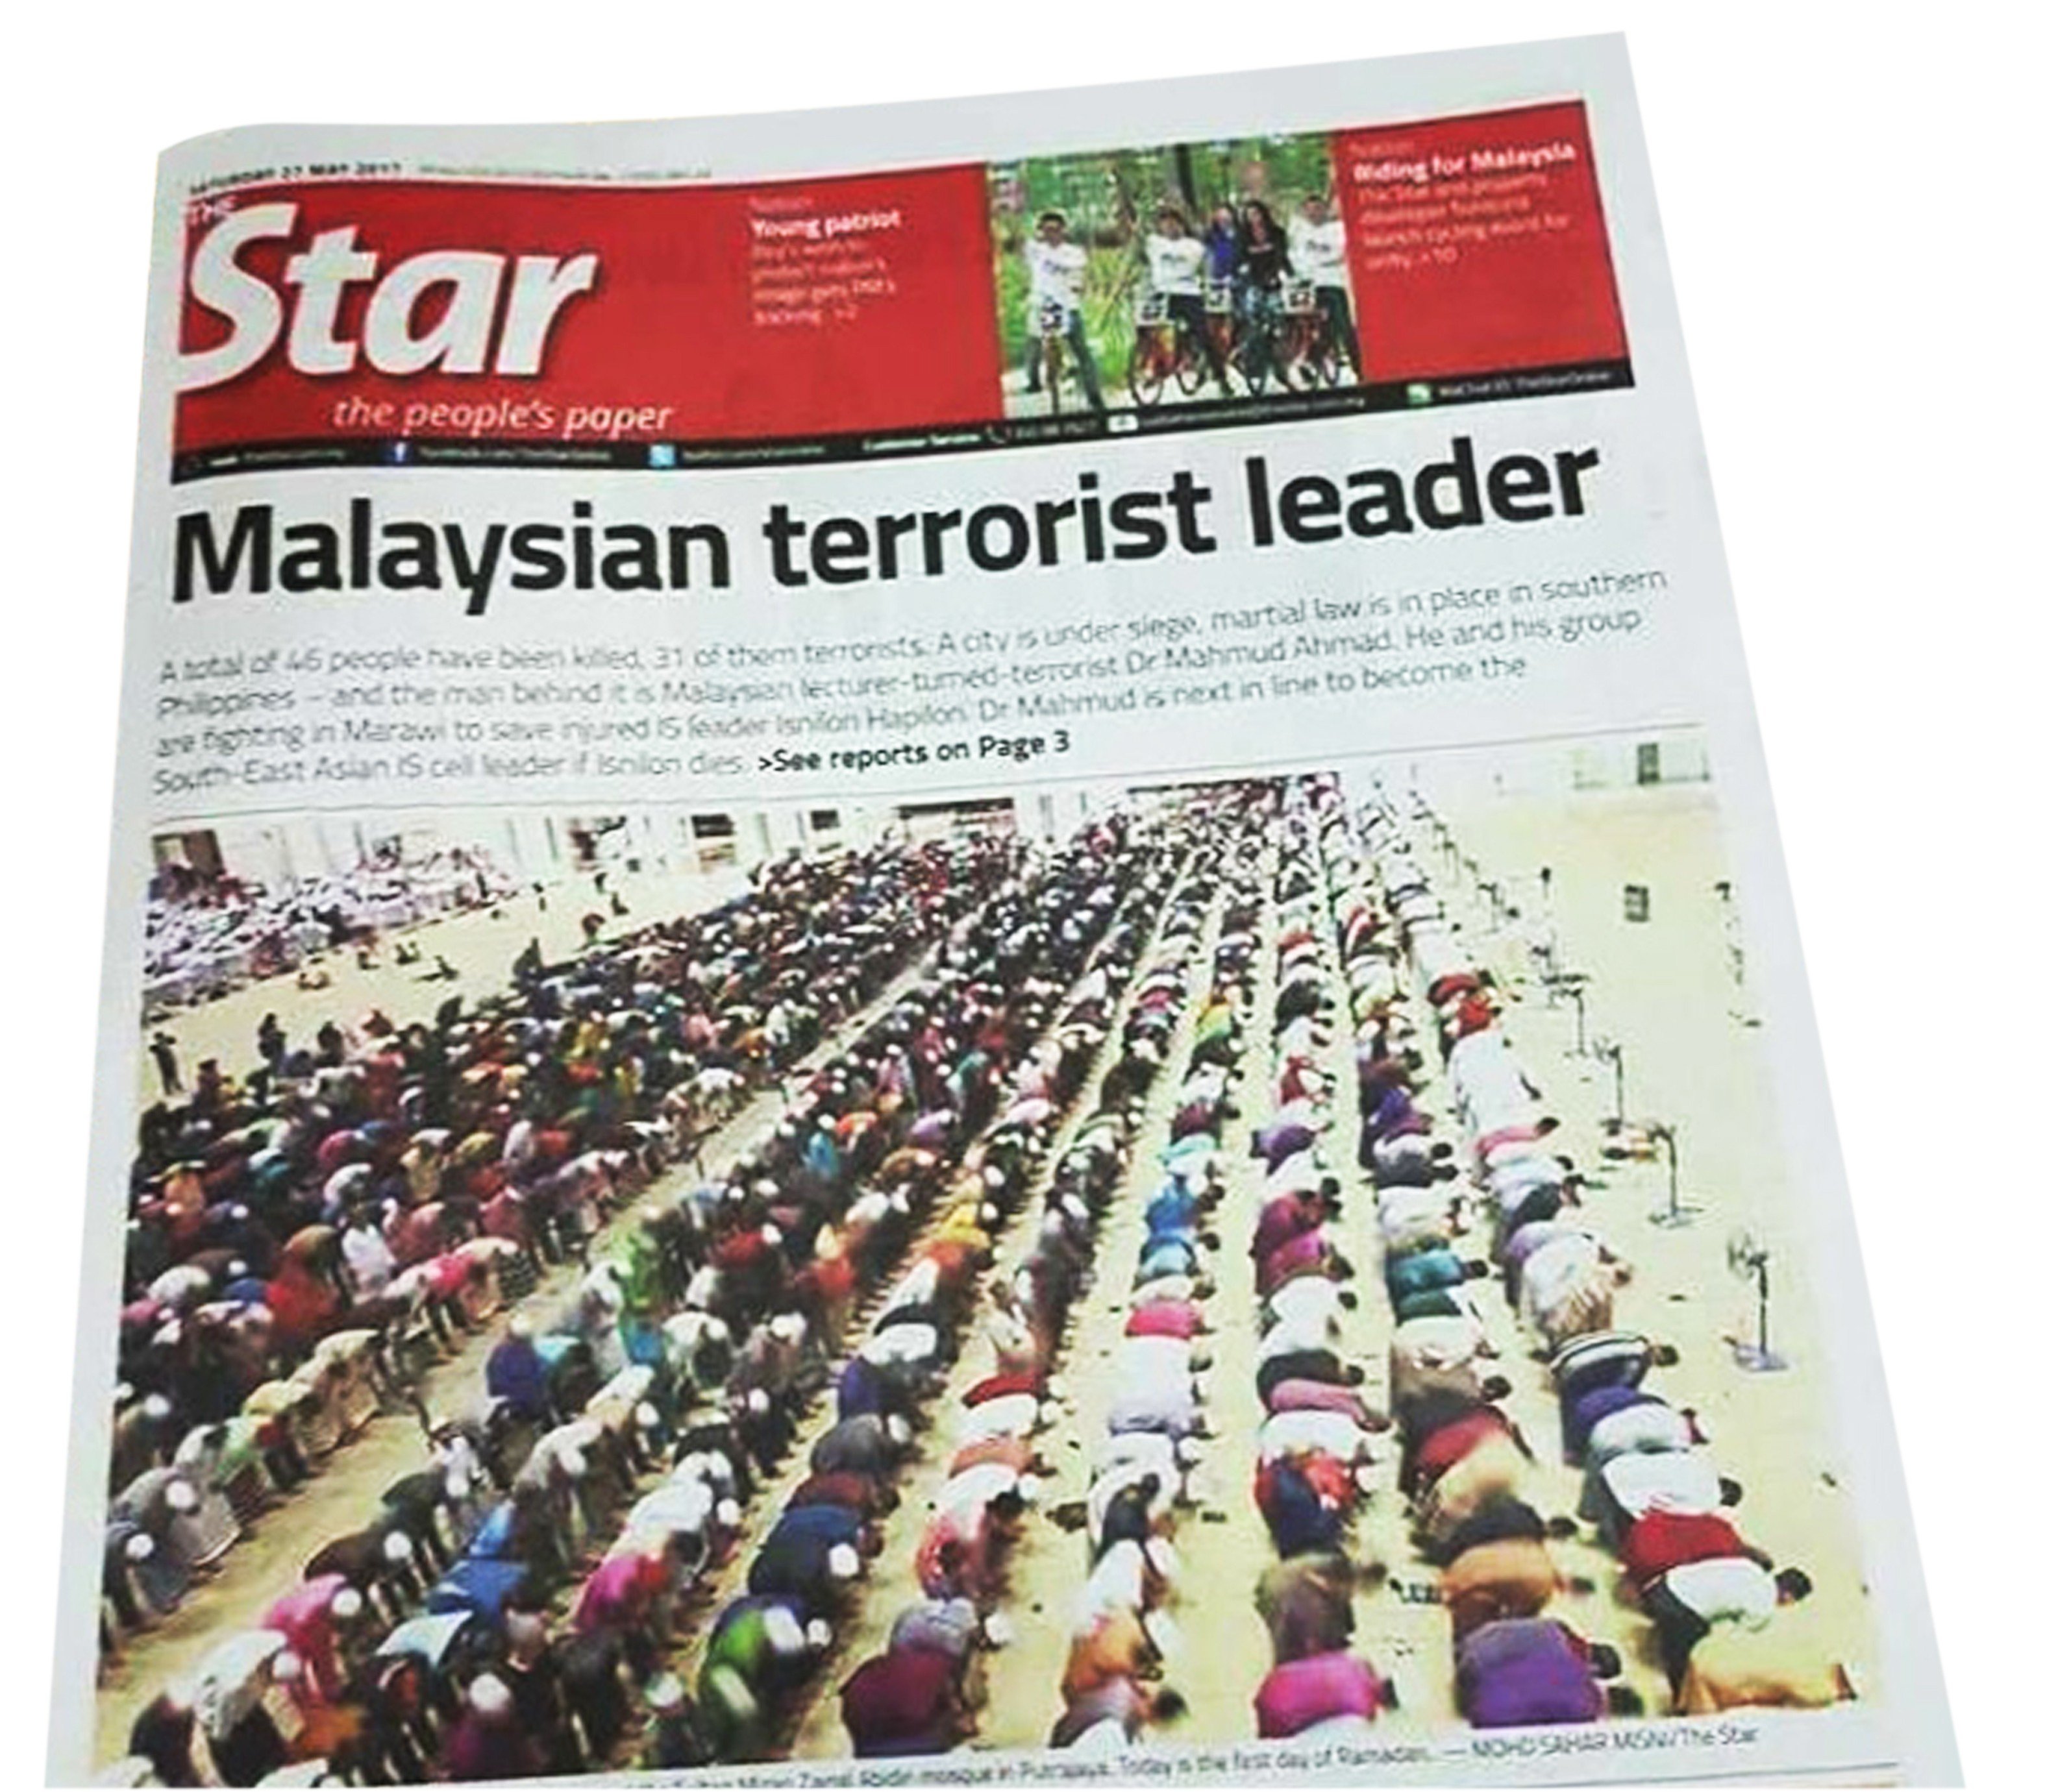 The Star's controversial front page, which enraged many Malaysians. Photo: Internet